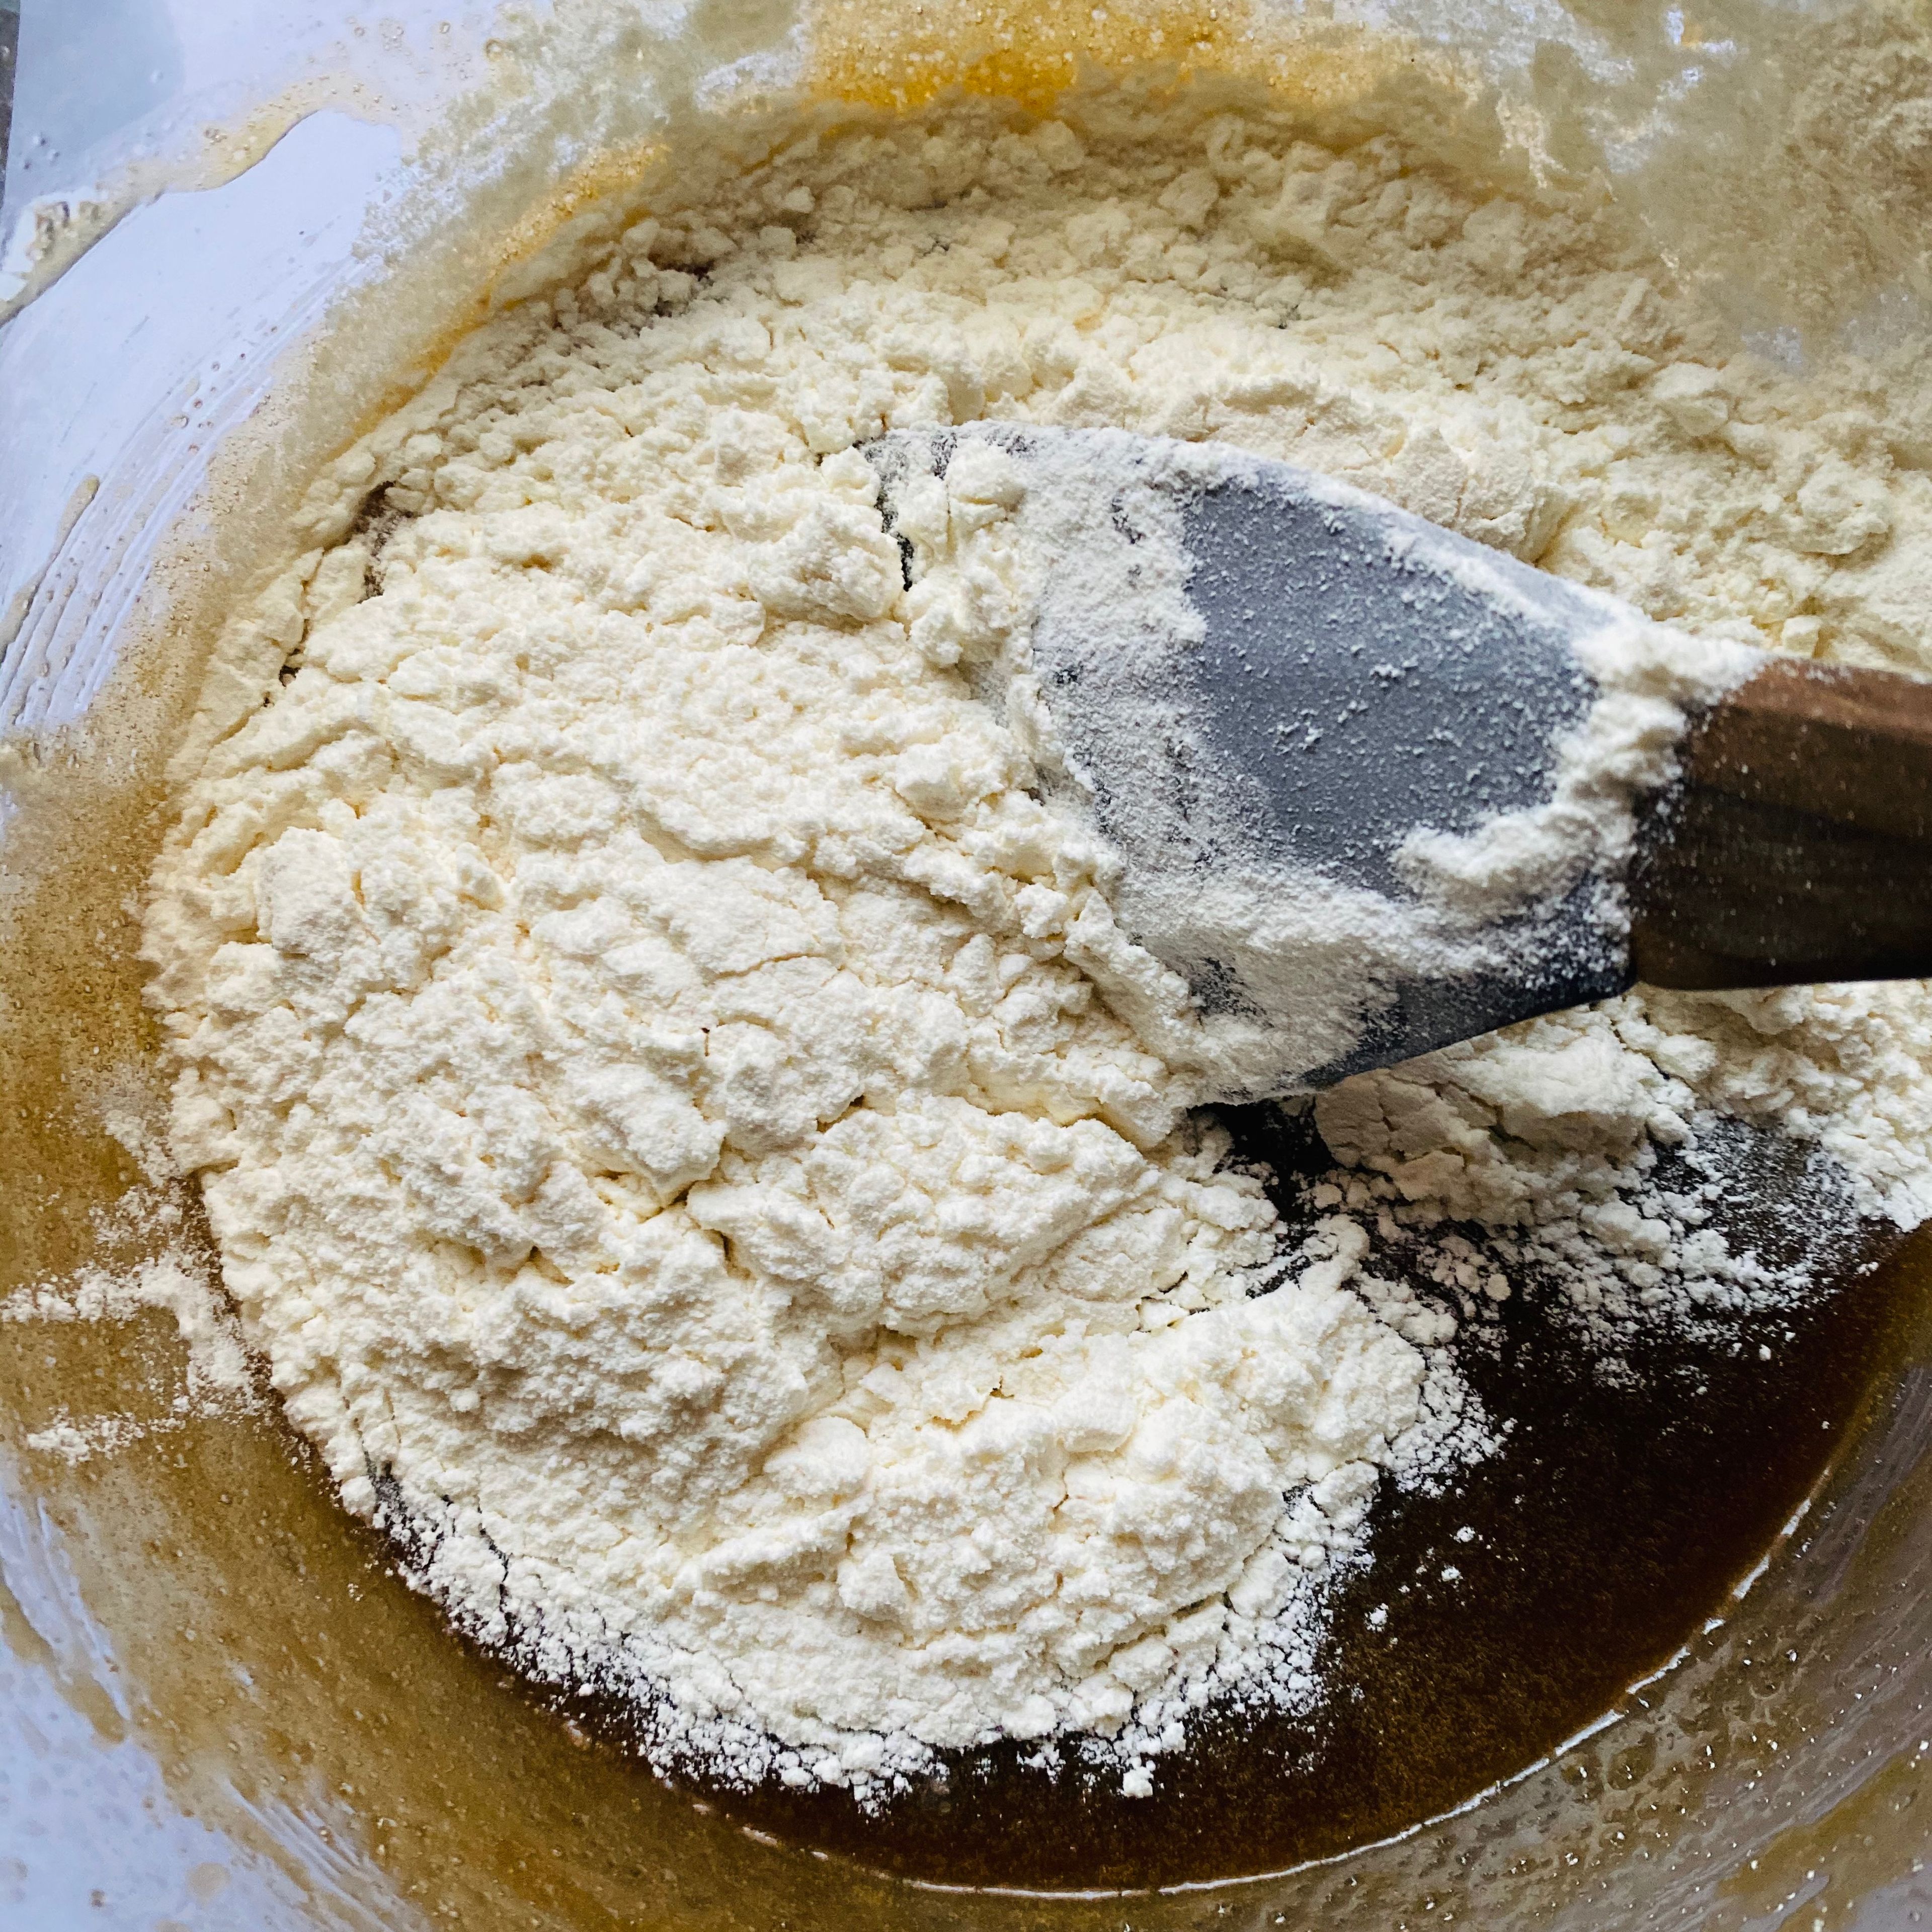 Add the flour mixture to the sugar egg mix and combine until a soft dough forms